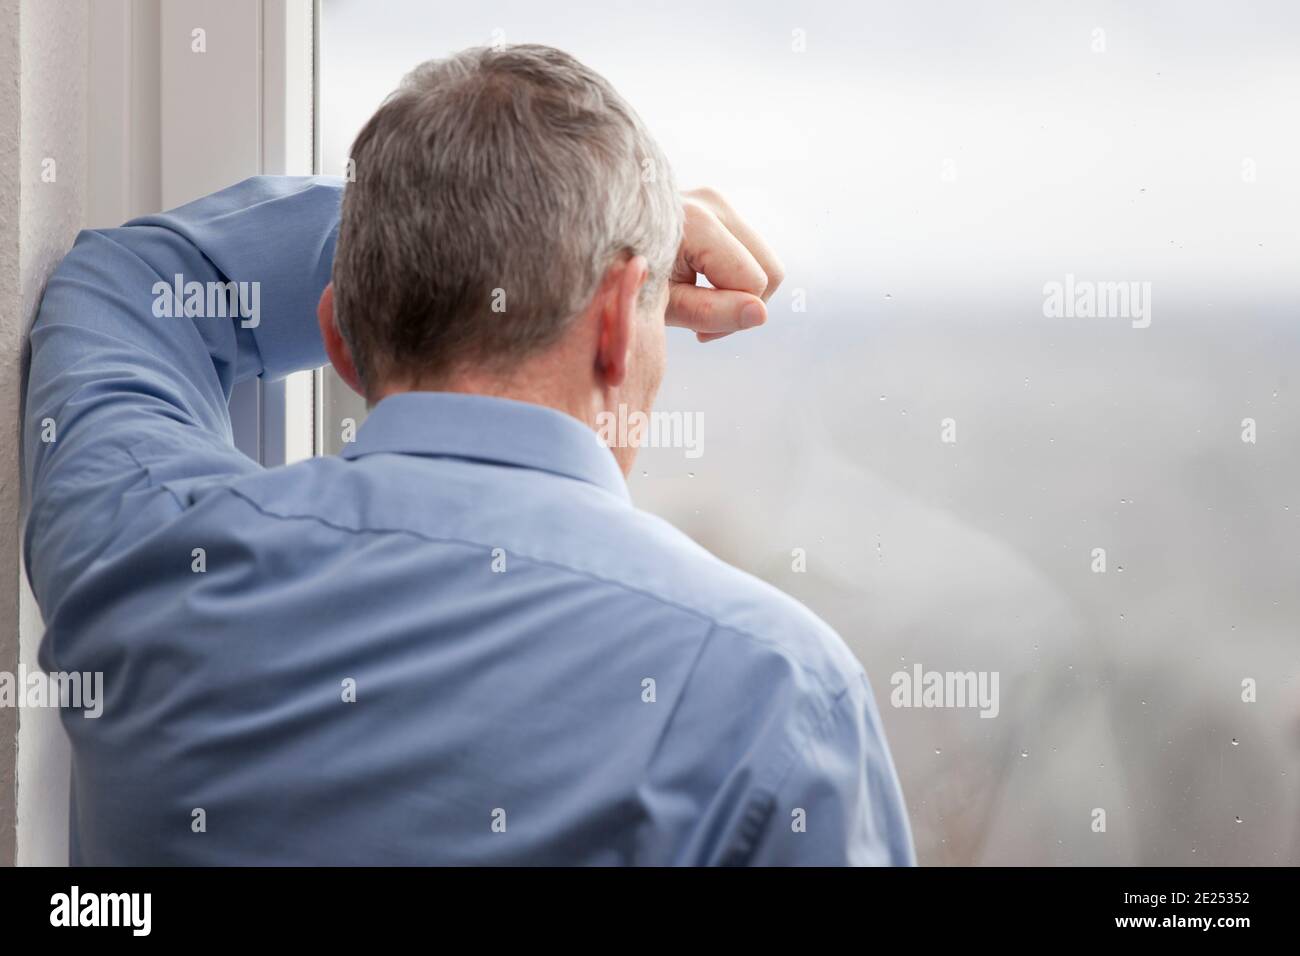 Tired or sorrowful businessman looking out of a window - focus on the hand and the window Stock Photo